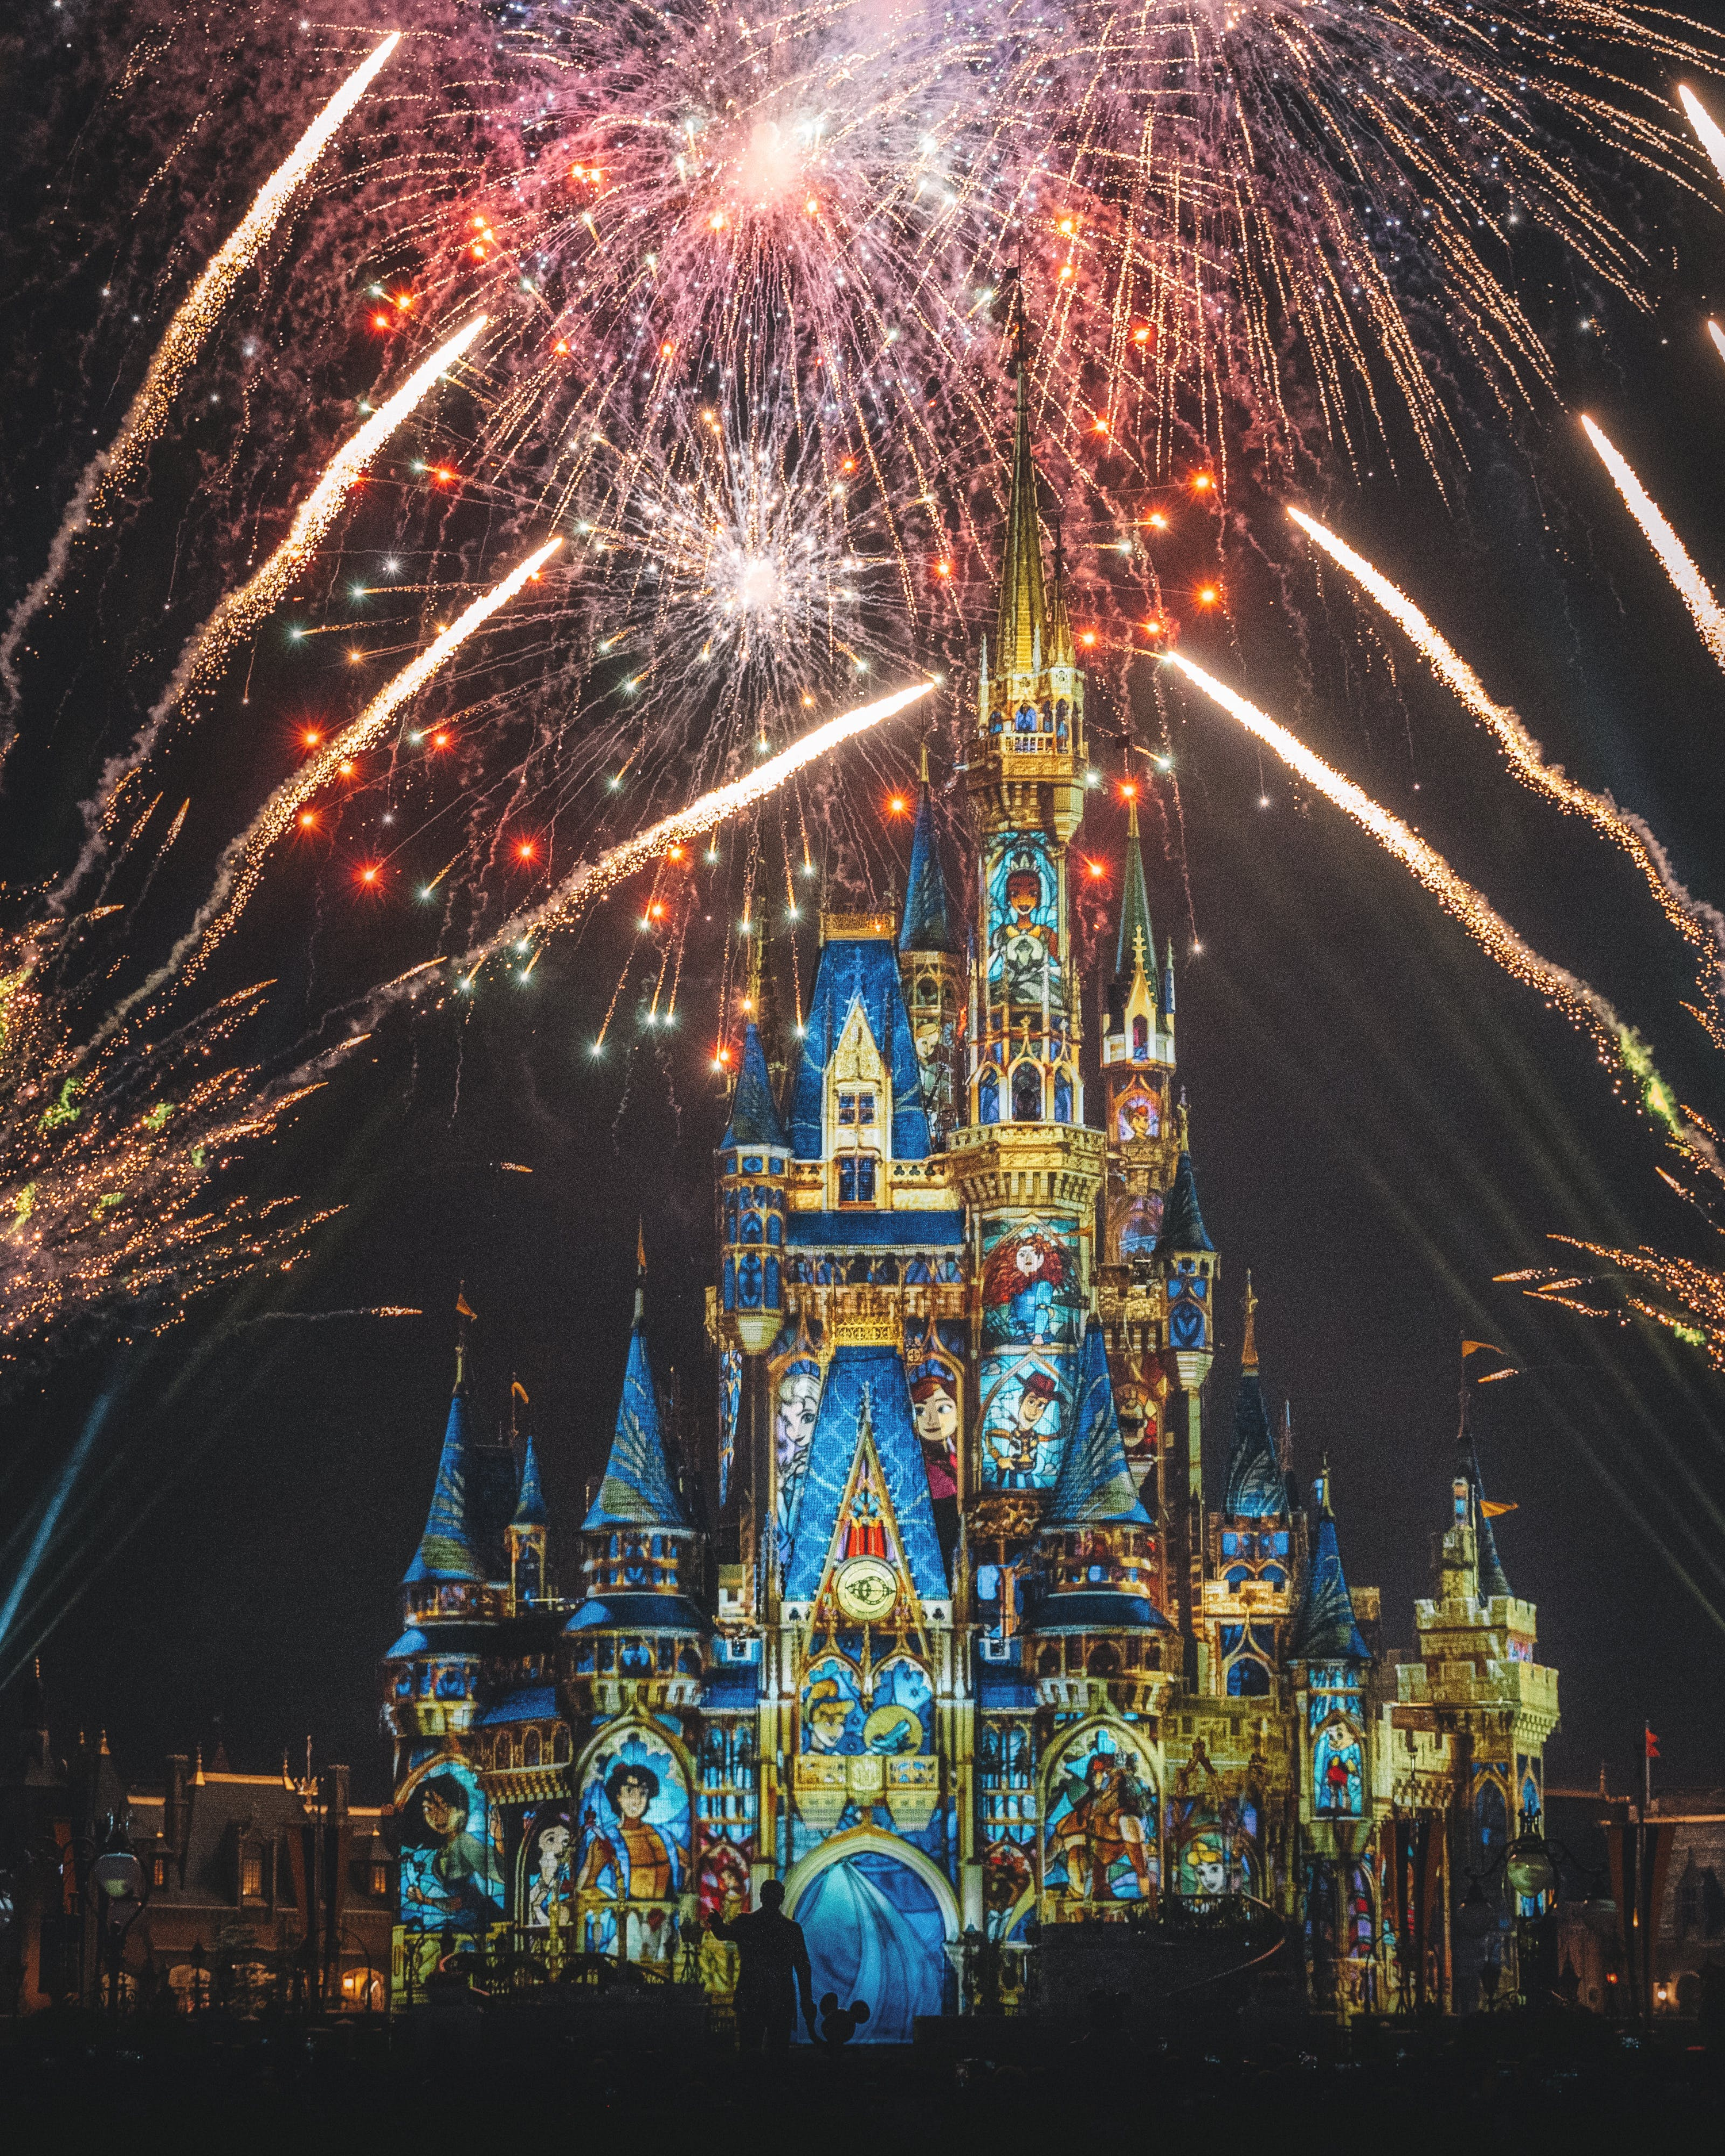 Planning A Trip To Disney? You NEED To Know This First!